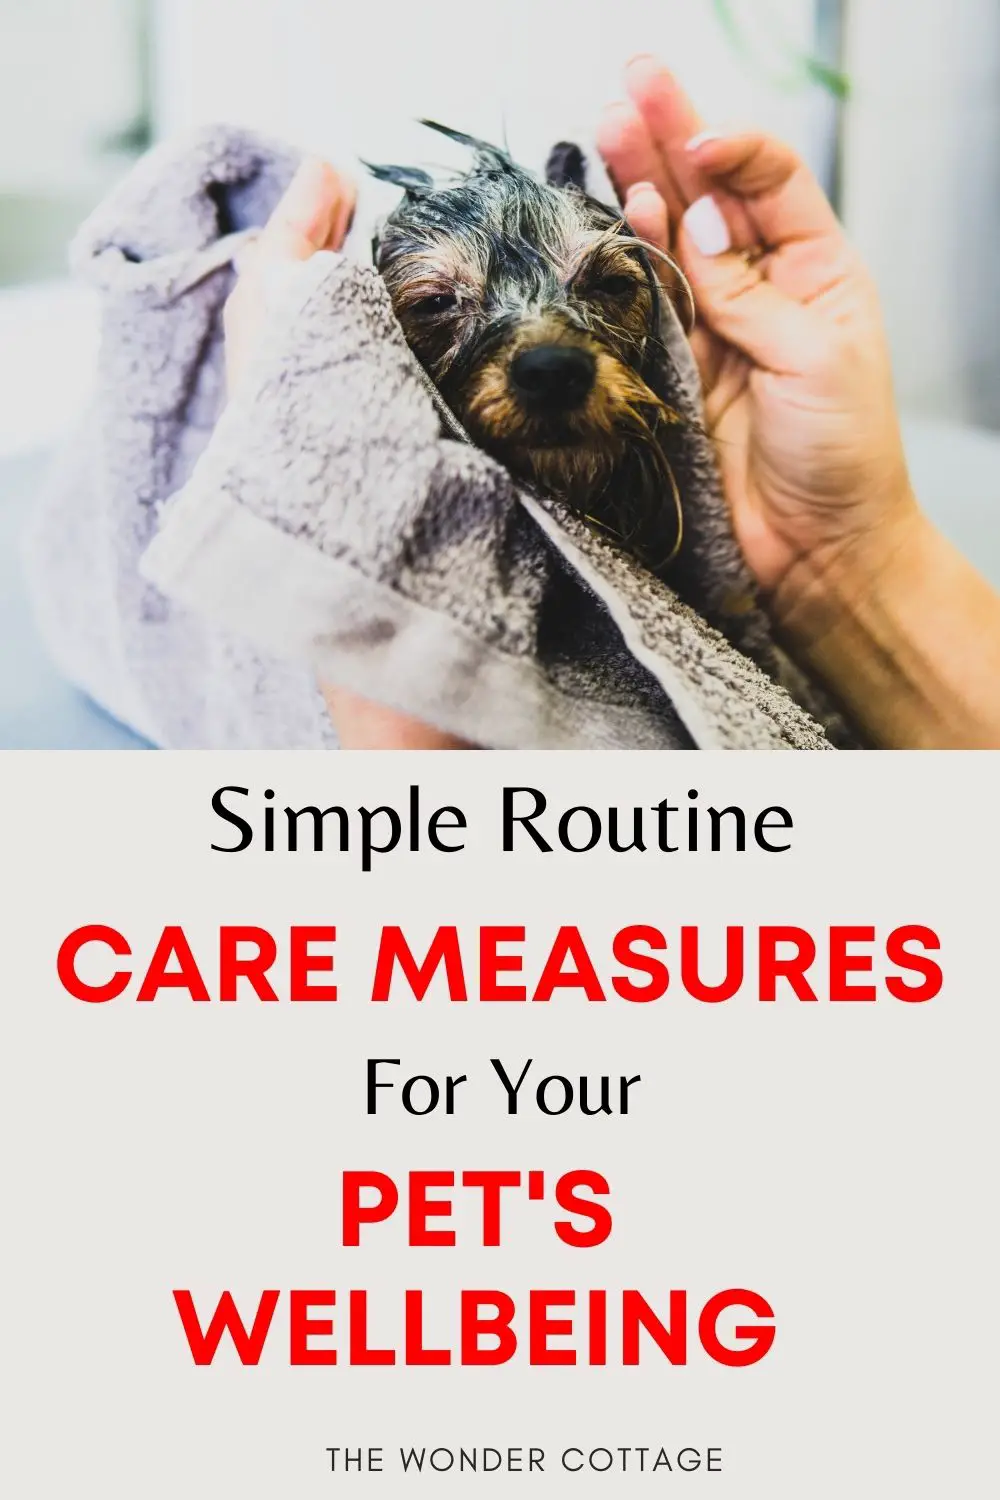 Simple Routine Care Measures To Maintain Your Pet’s Well-Being